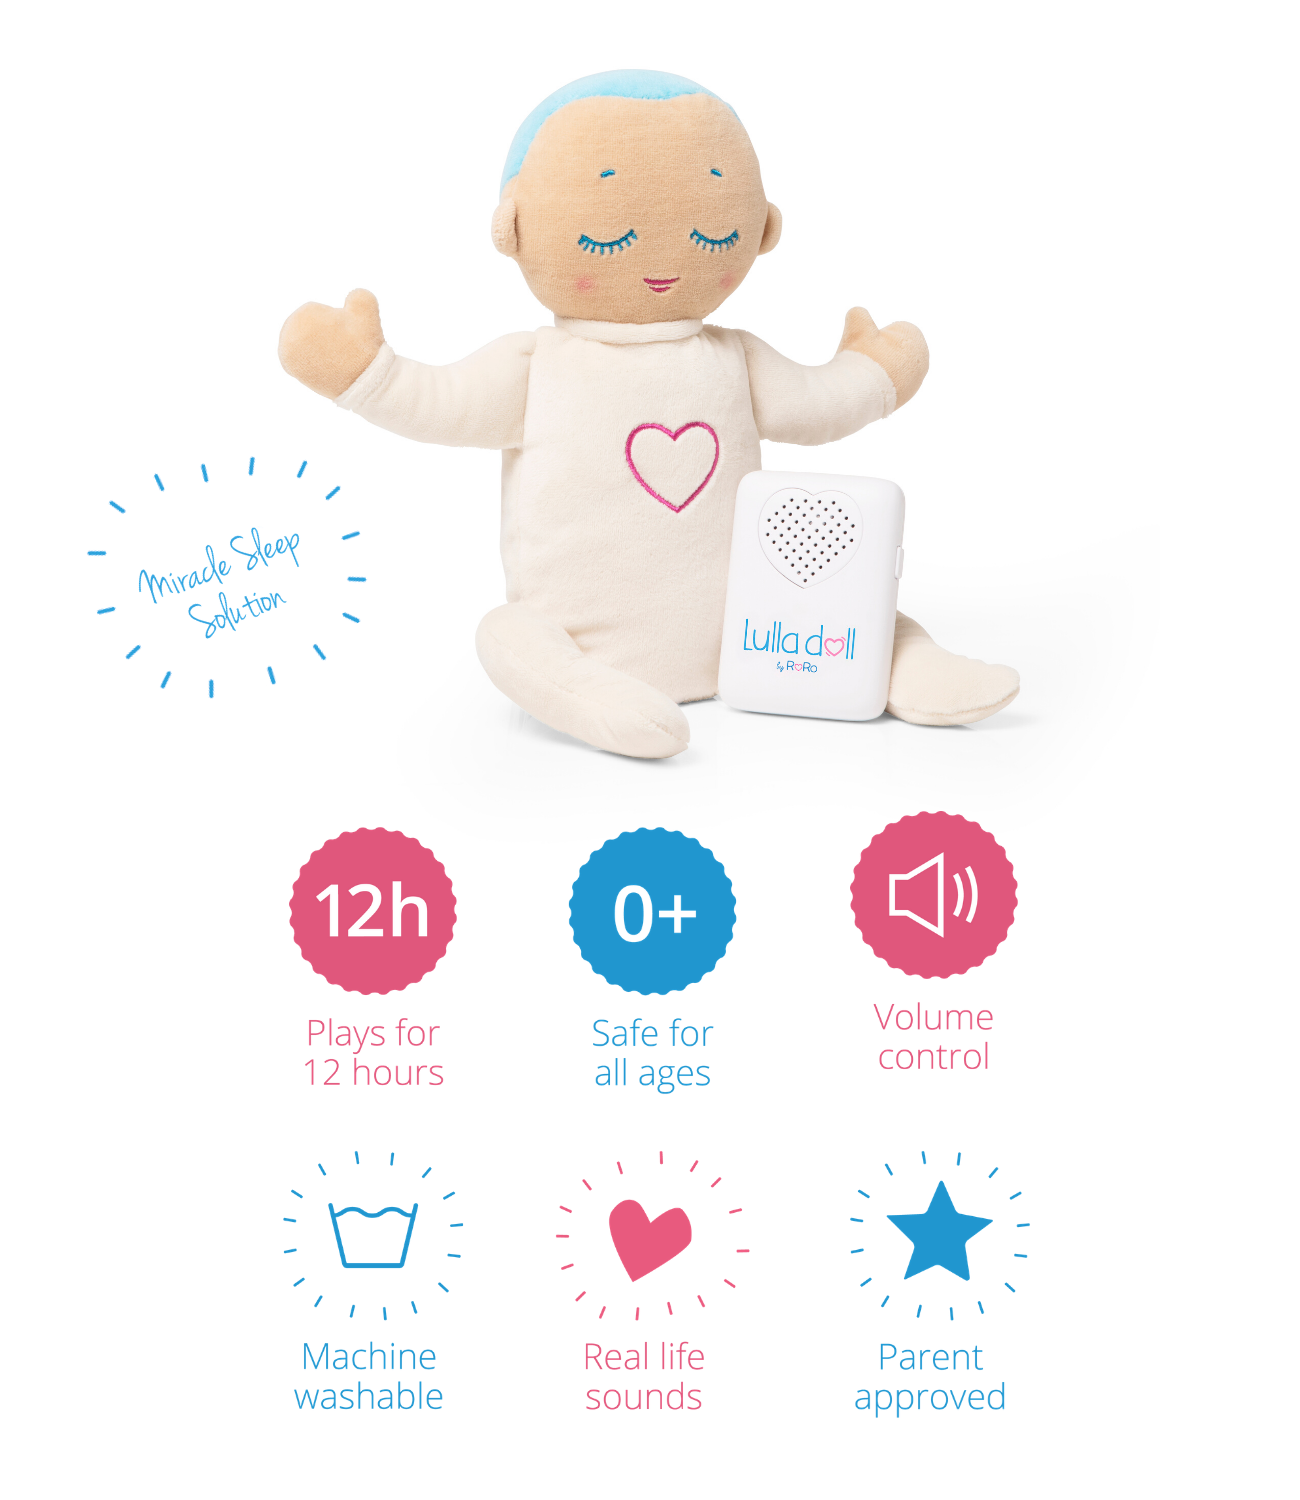 Lulla doll is the best sleep aid for babies